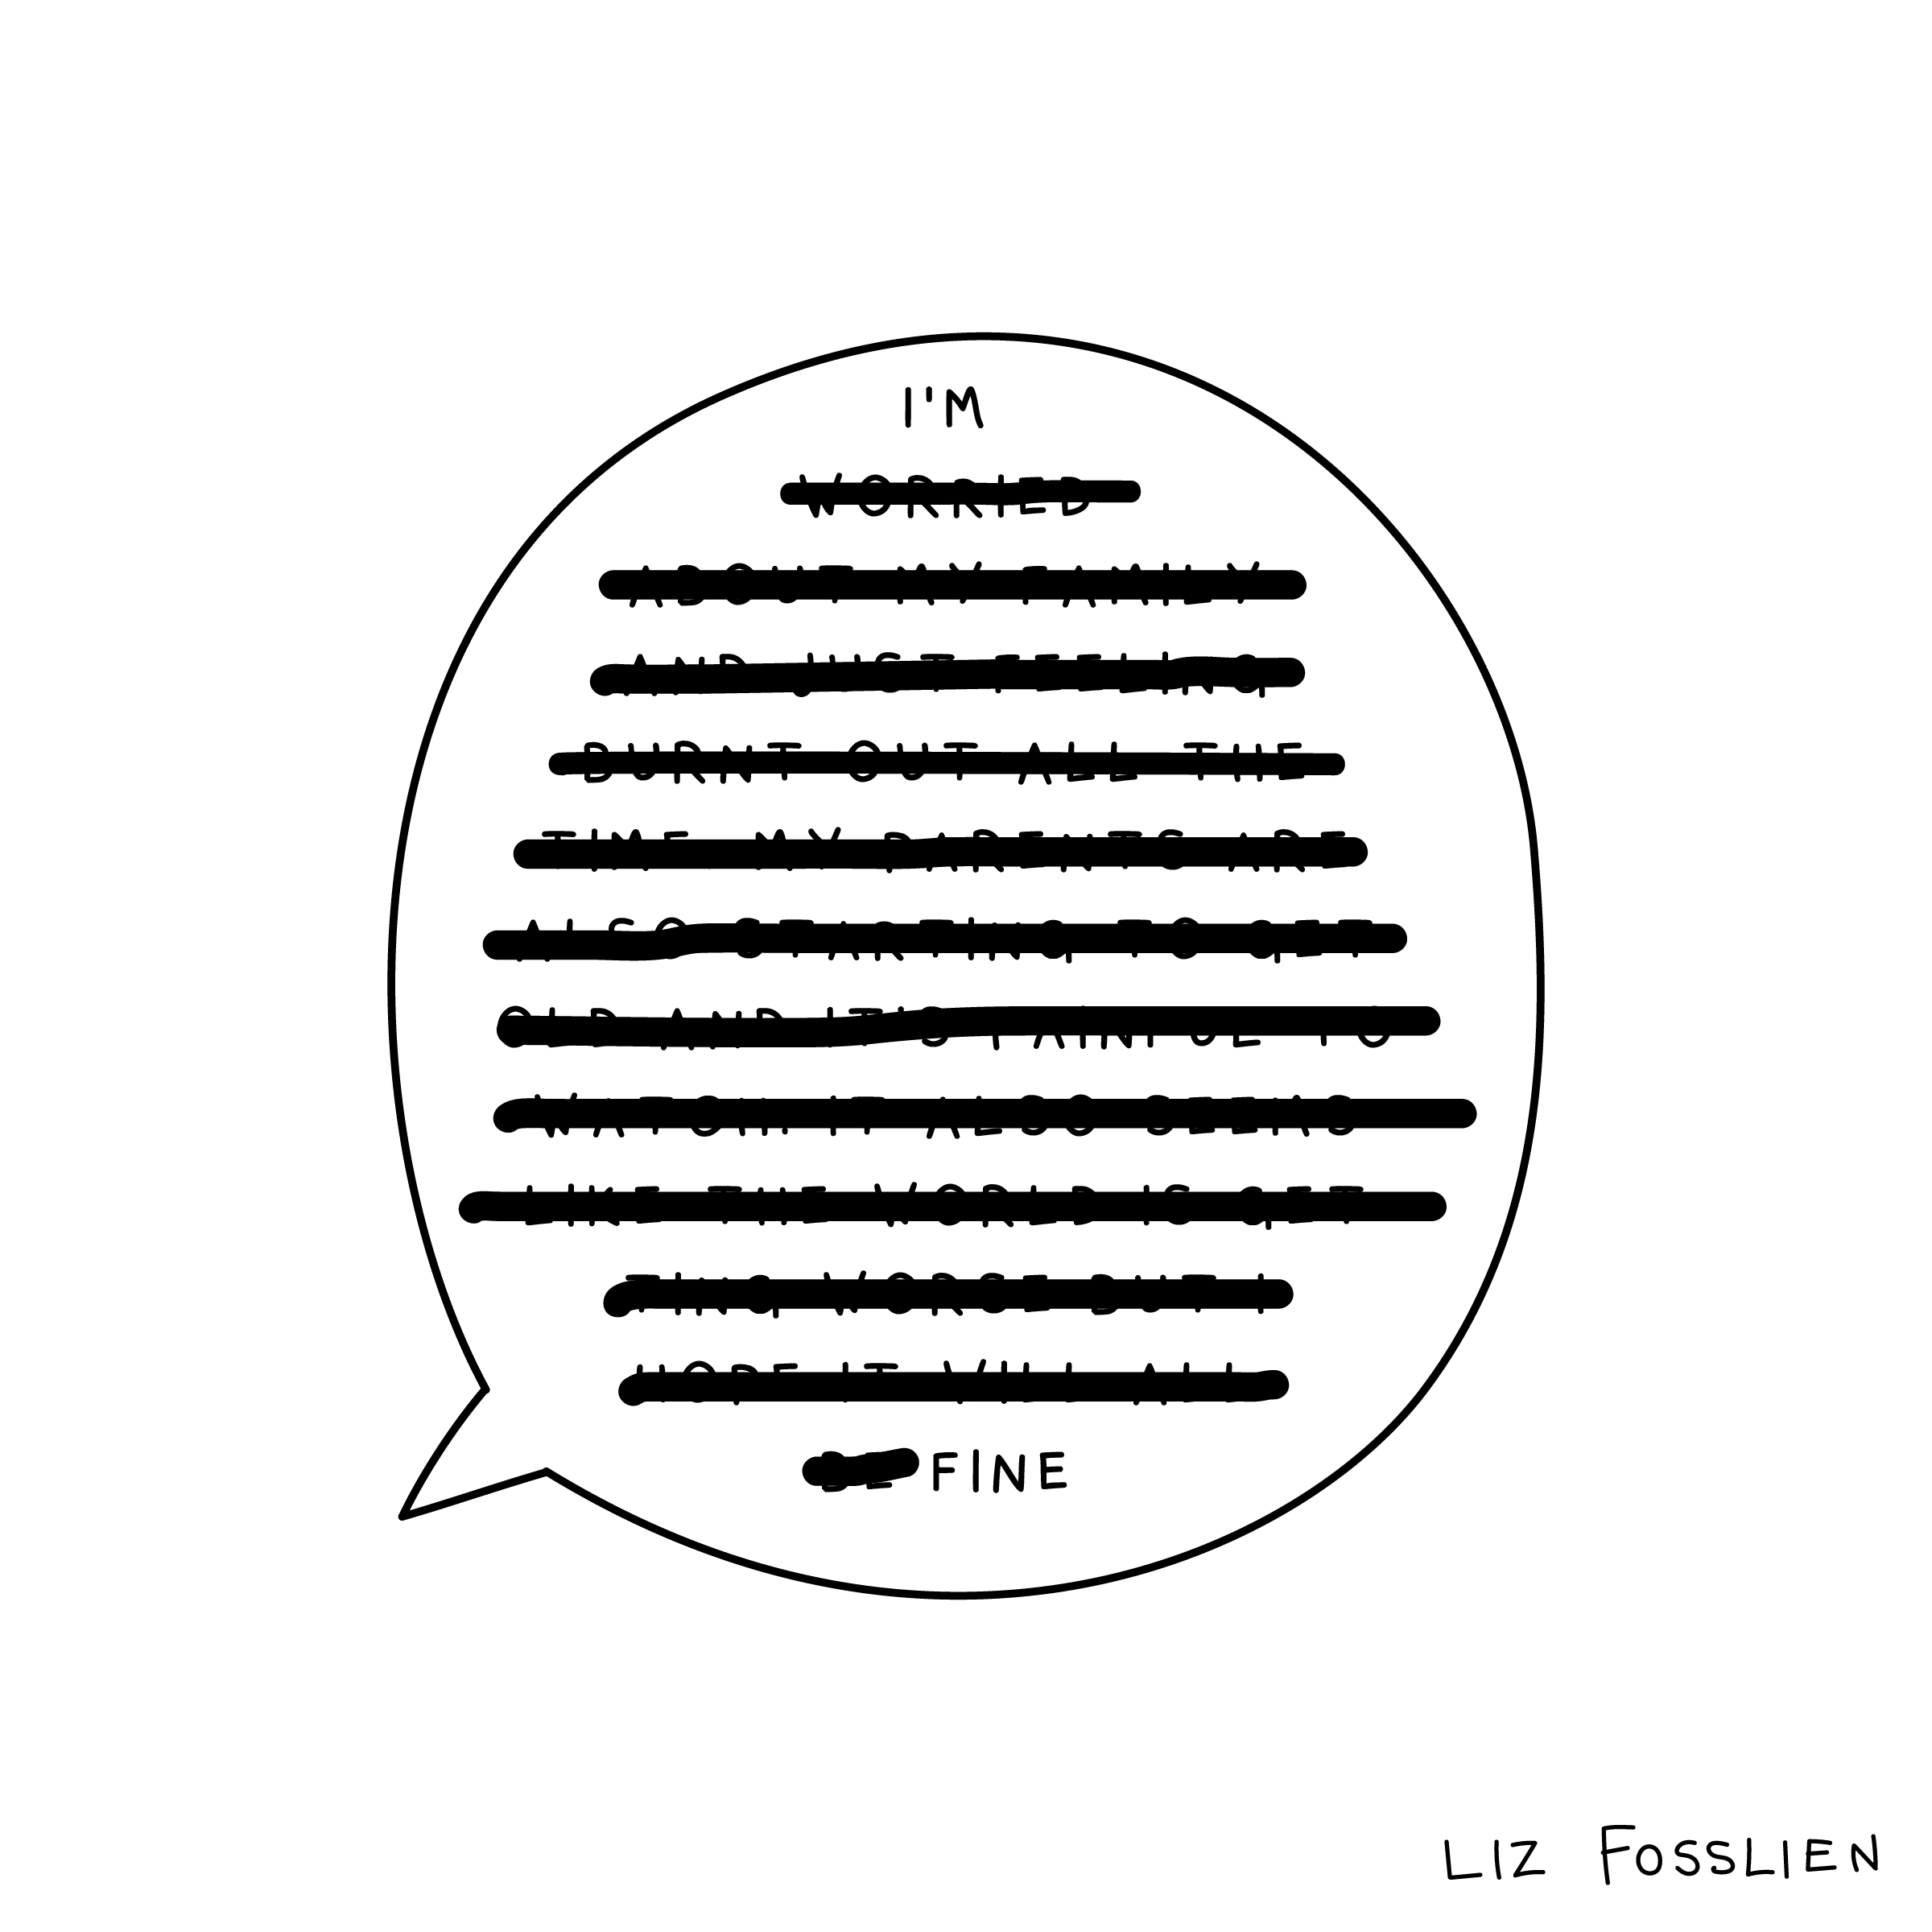 Cartoon of speech bubble with words "I'm fine" with all of the emotions left unsaid crossed out